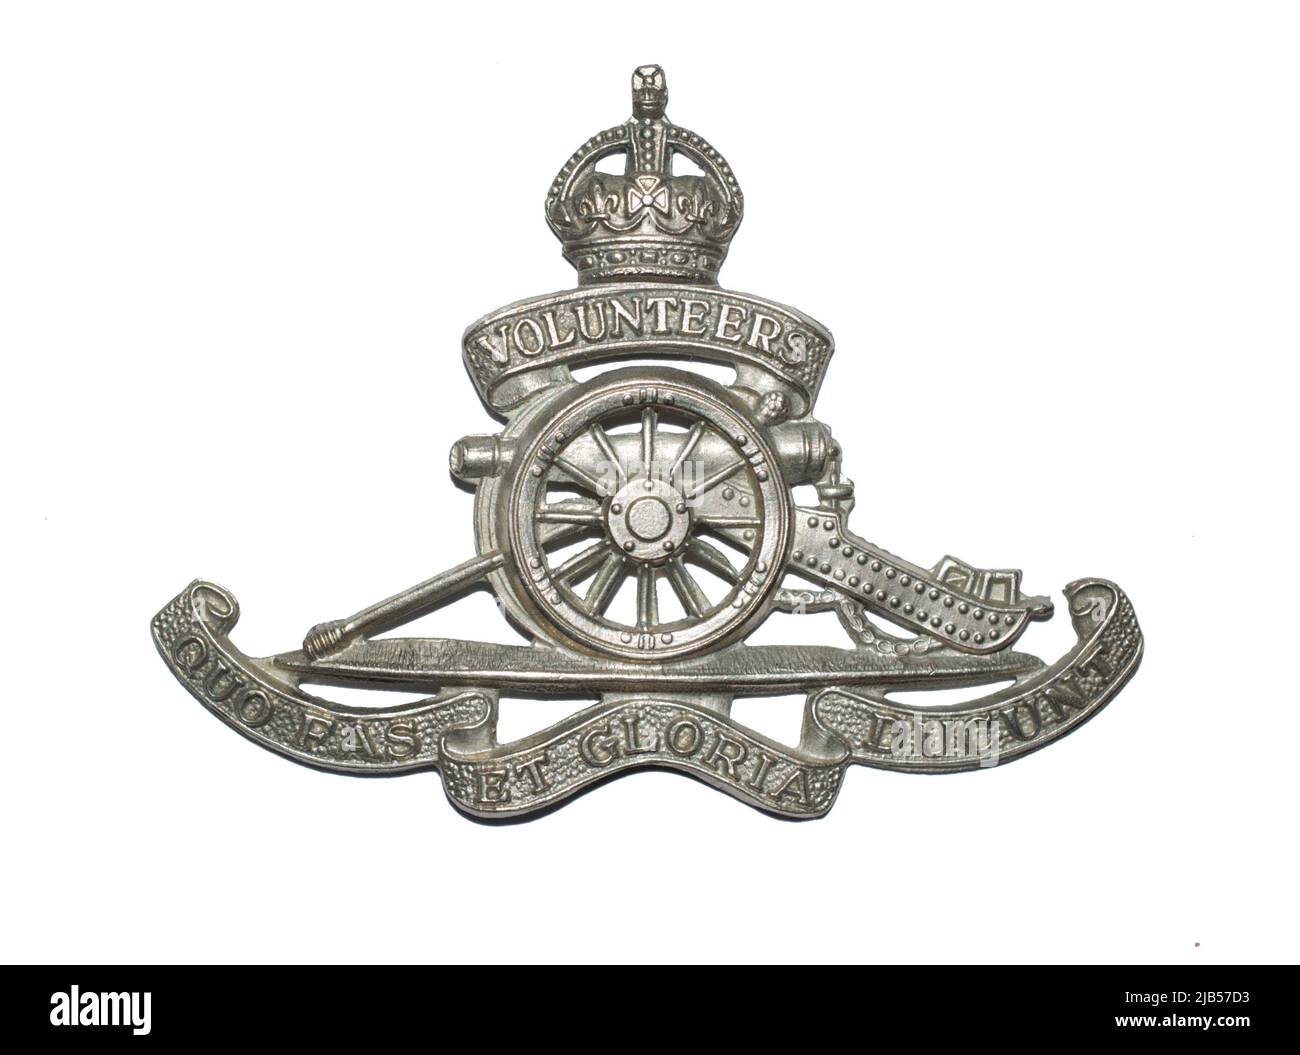 A cap badge of the Royal Artillery Volunteers in white metal c. 1902-1908. Stock Photo